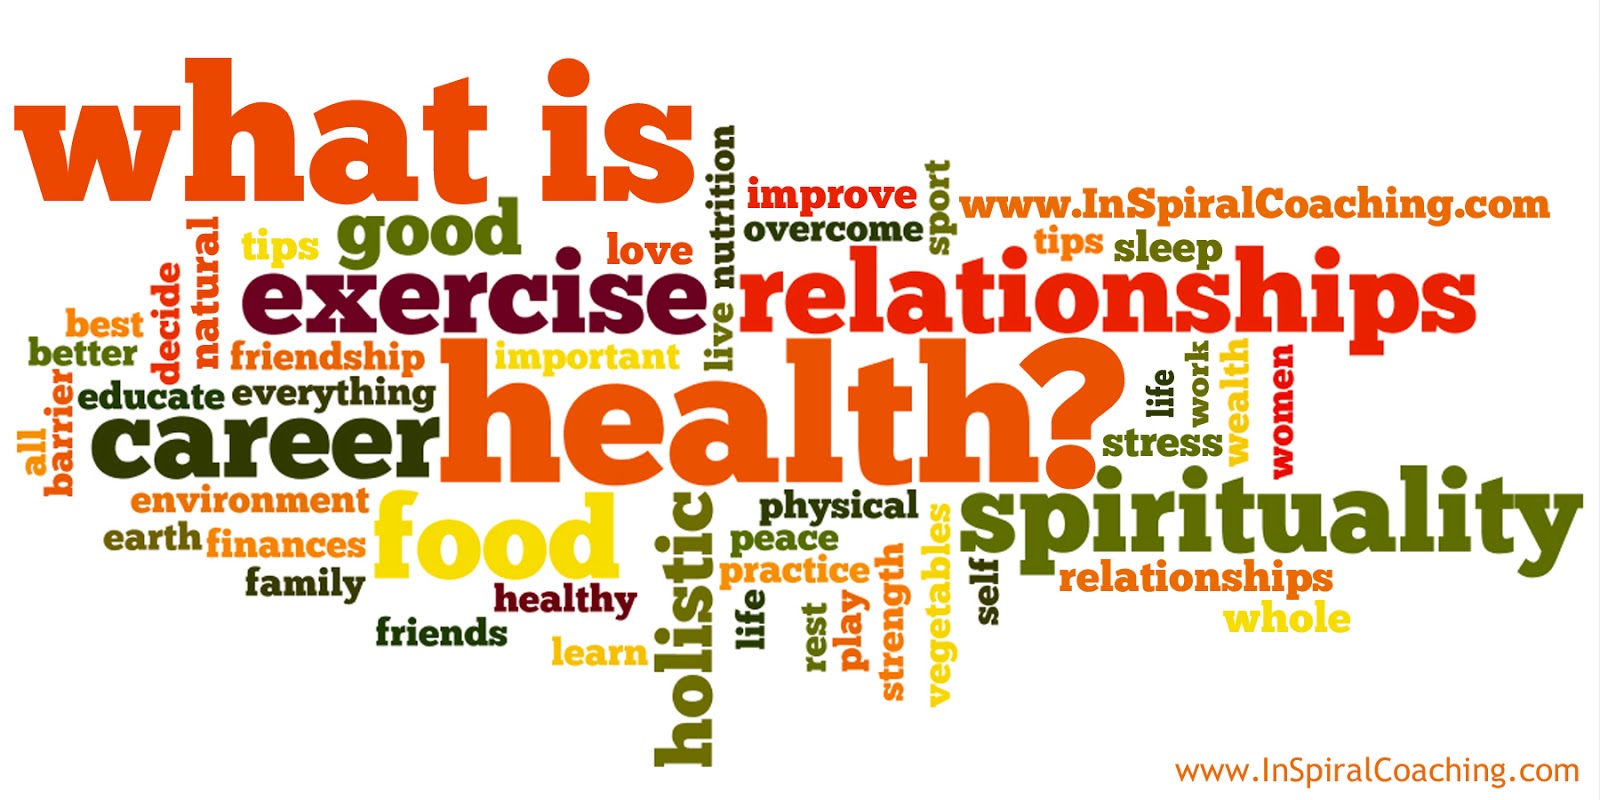 What is the Role of a Wellness Coach?